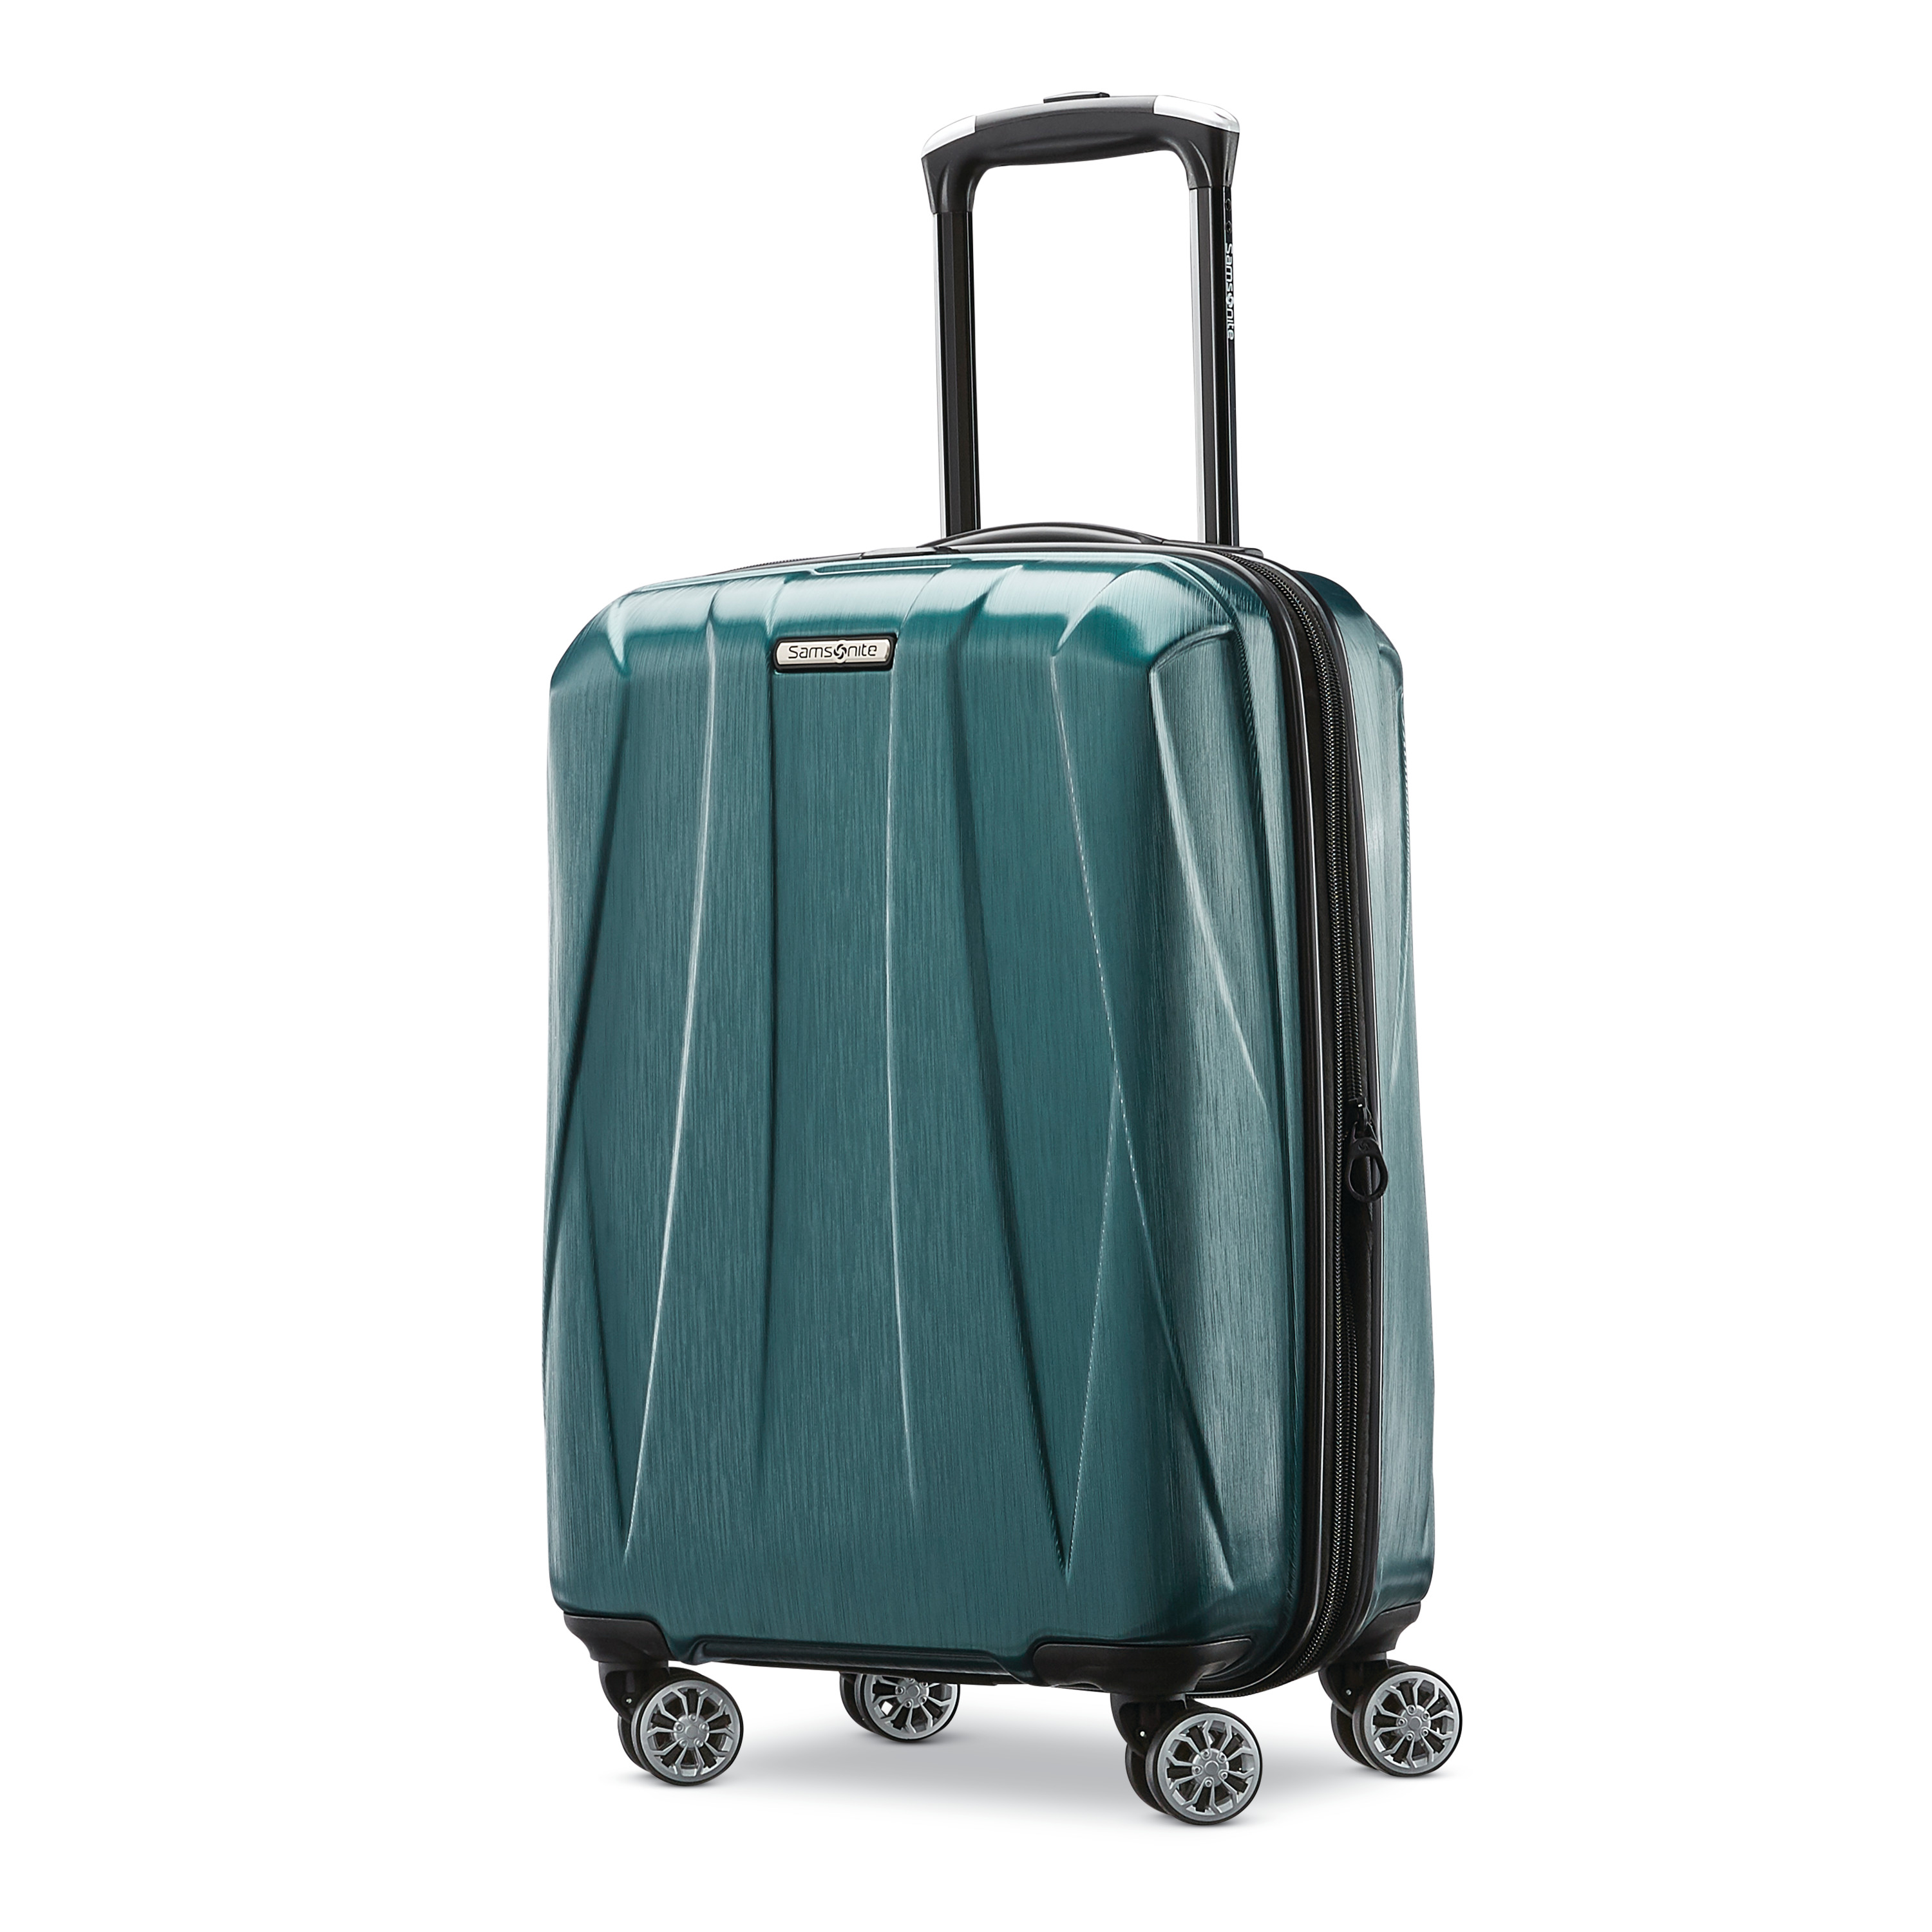 Samsonite Centric 2 Expandable Hardside Carry On Luggage with Dual